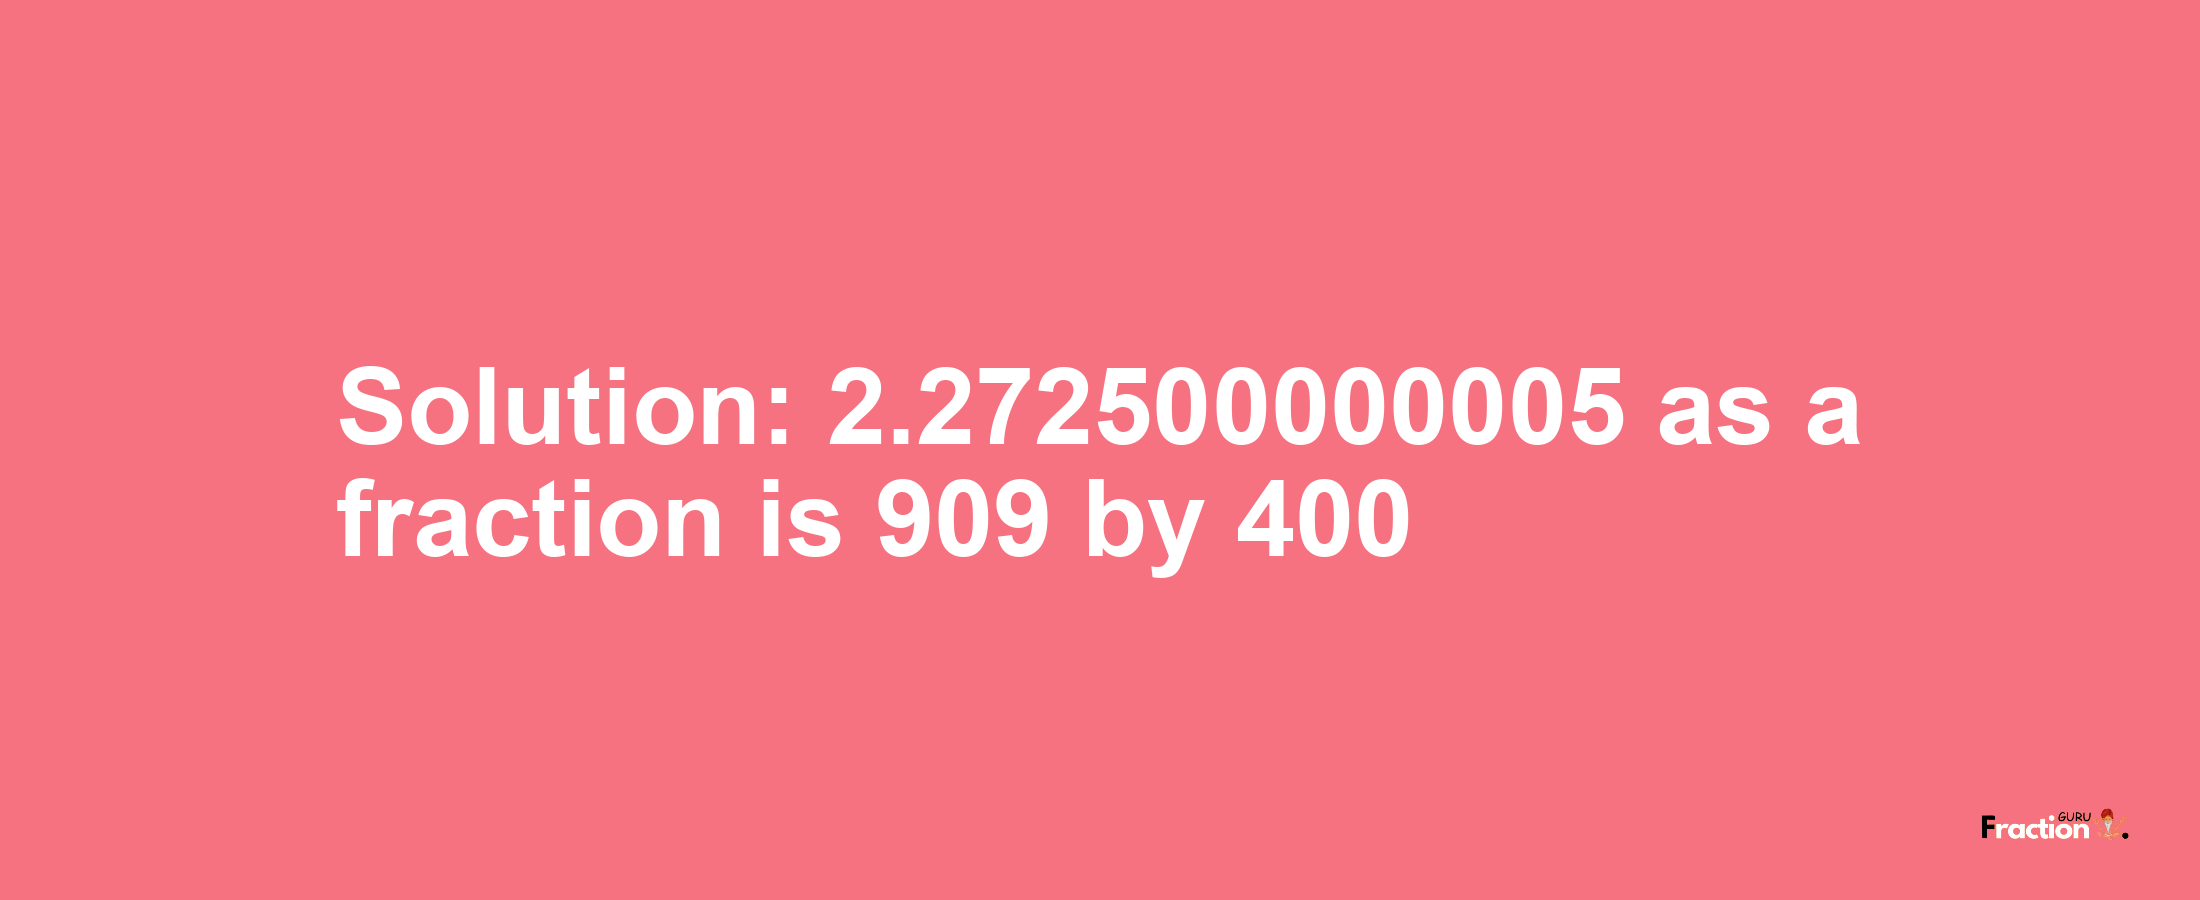 Solution:2.272500000005 as a fraction is 909/400